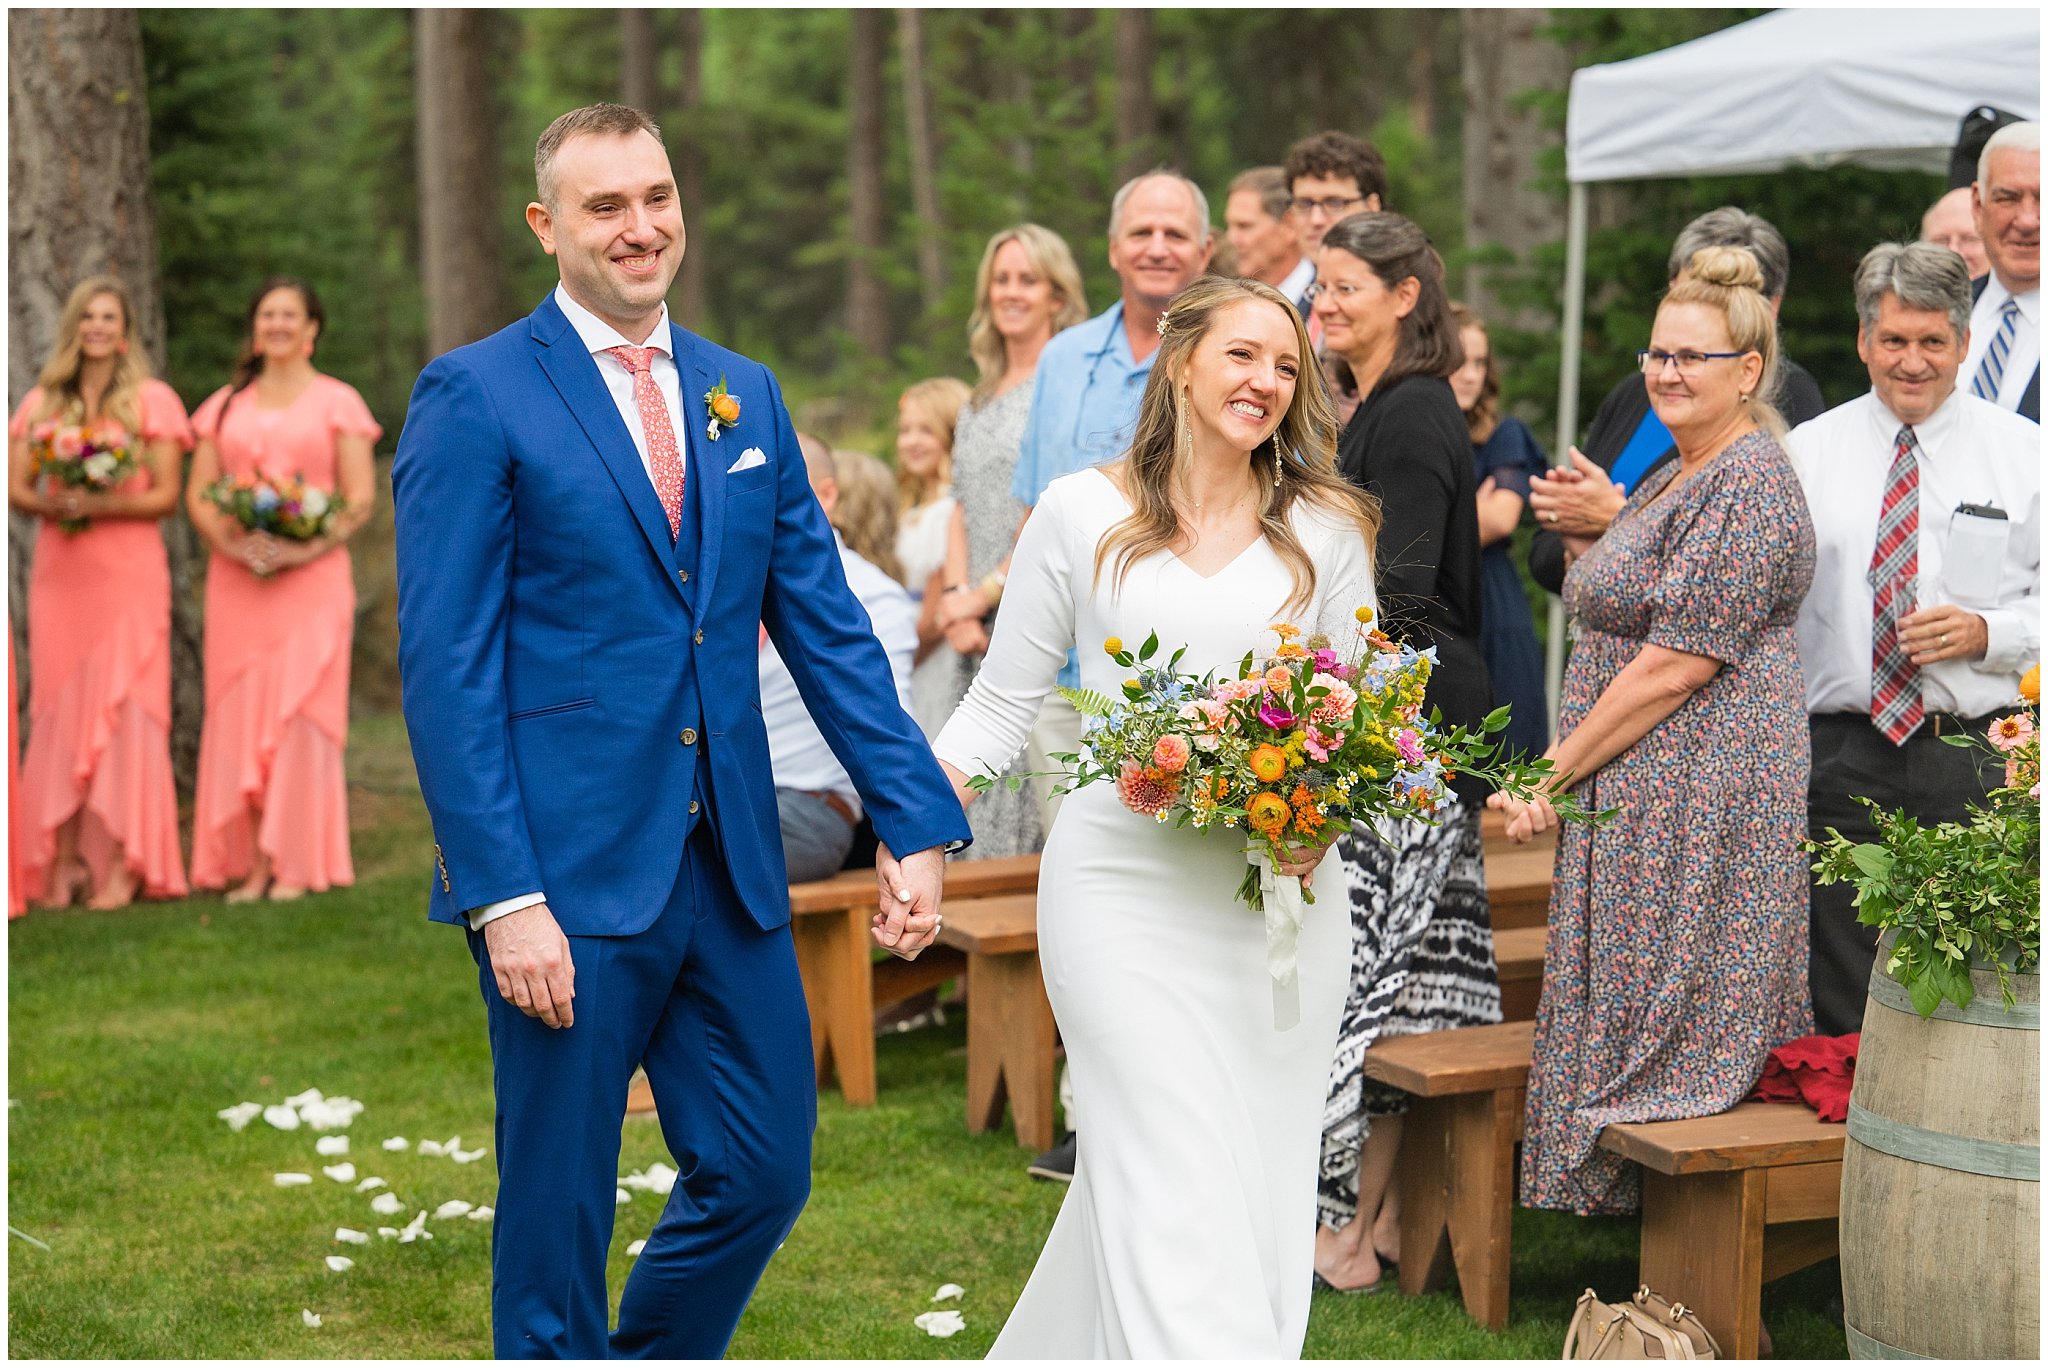 Emotional wedding ceremony in the forest of Montana forest | Mountainside Weddings Kalispell Montana Destination Wedding | Jessie and Dallin Photography